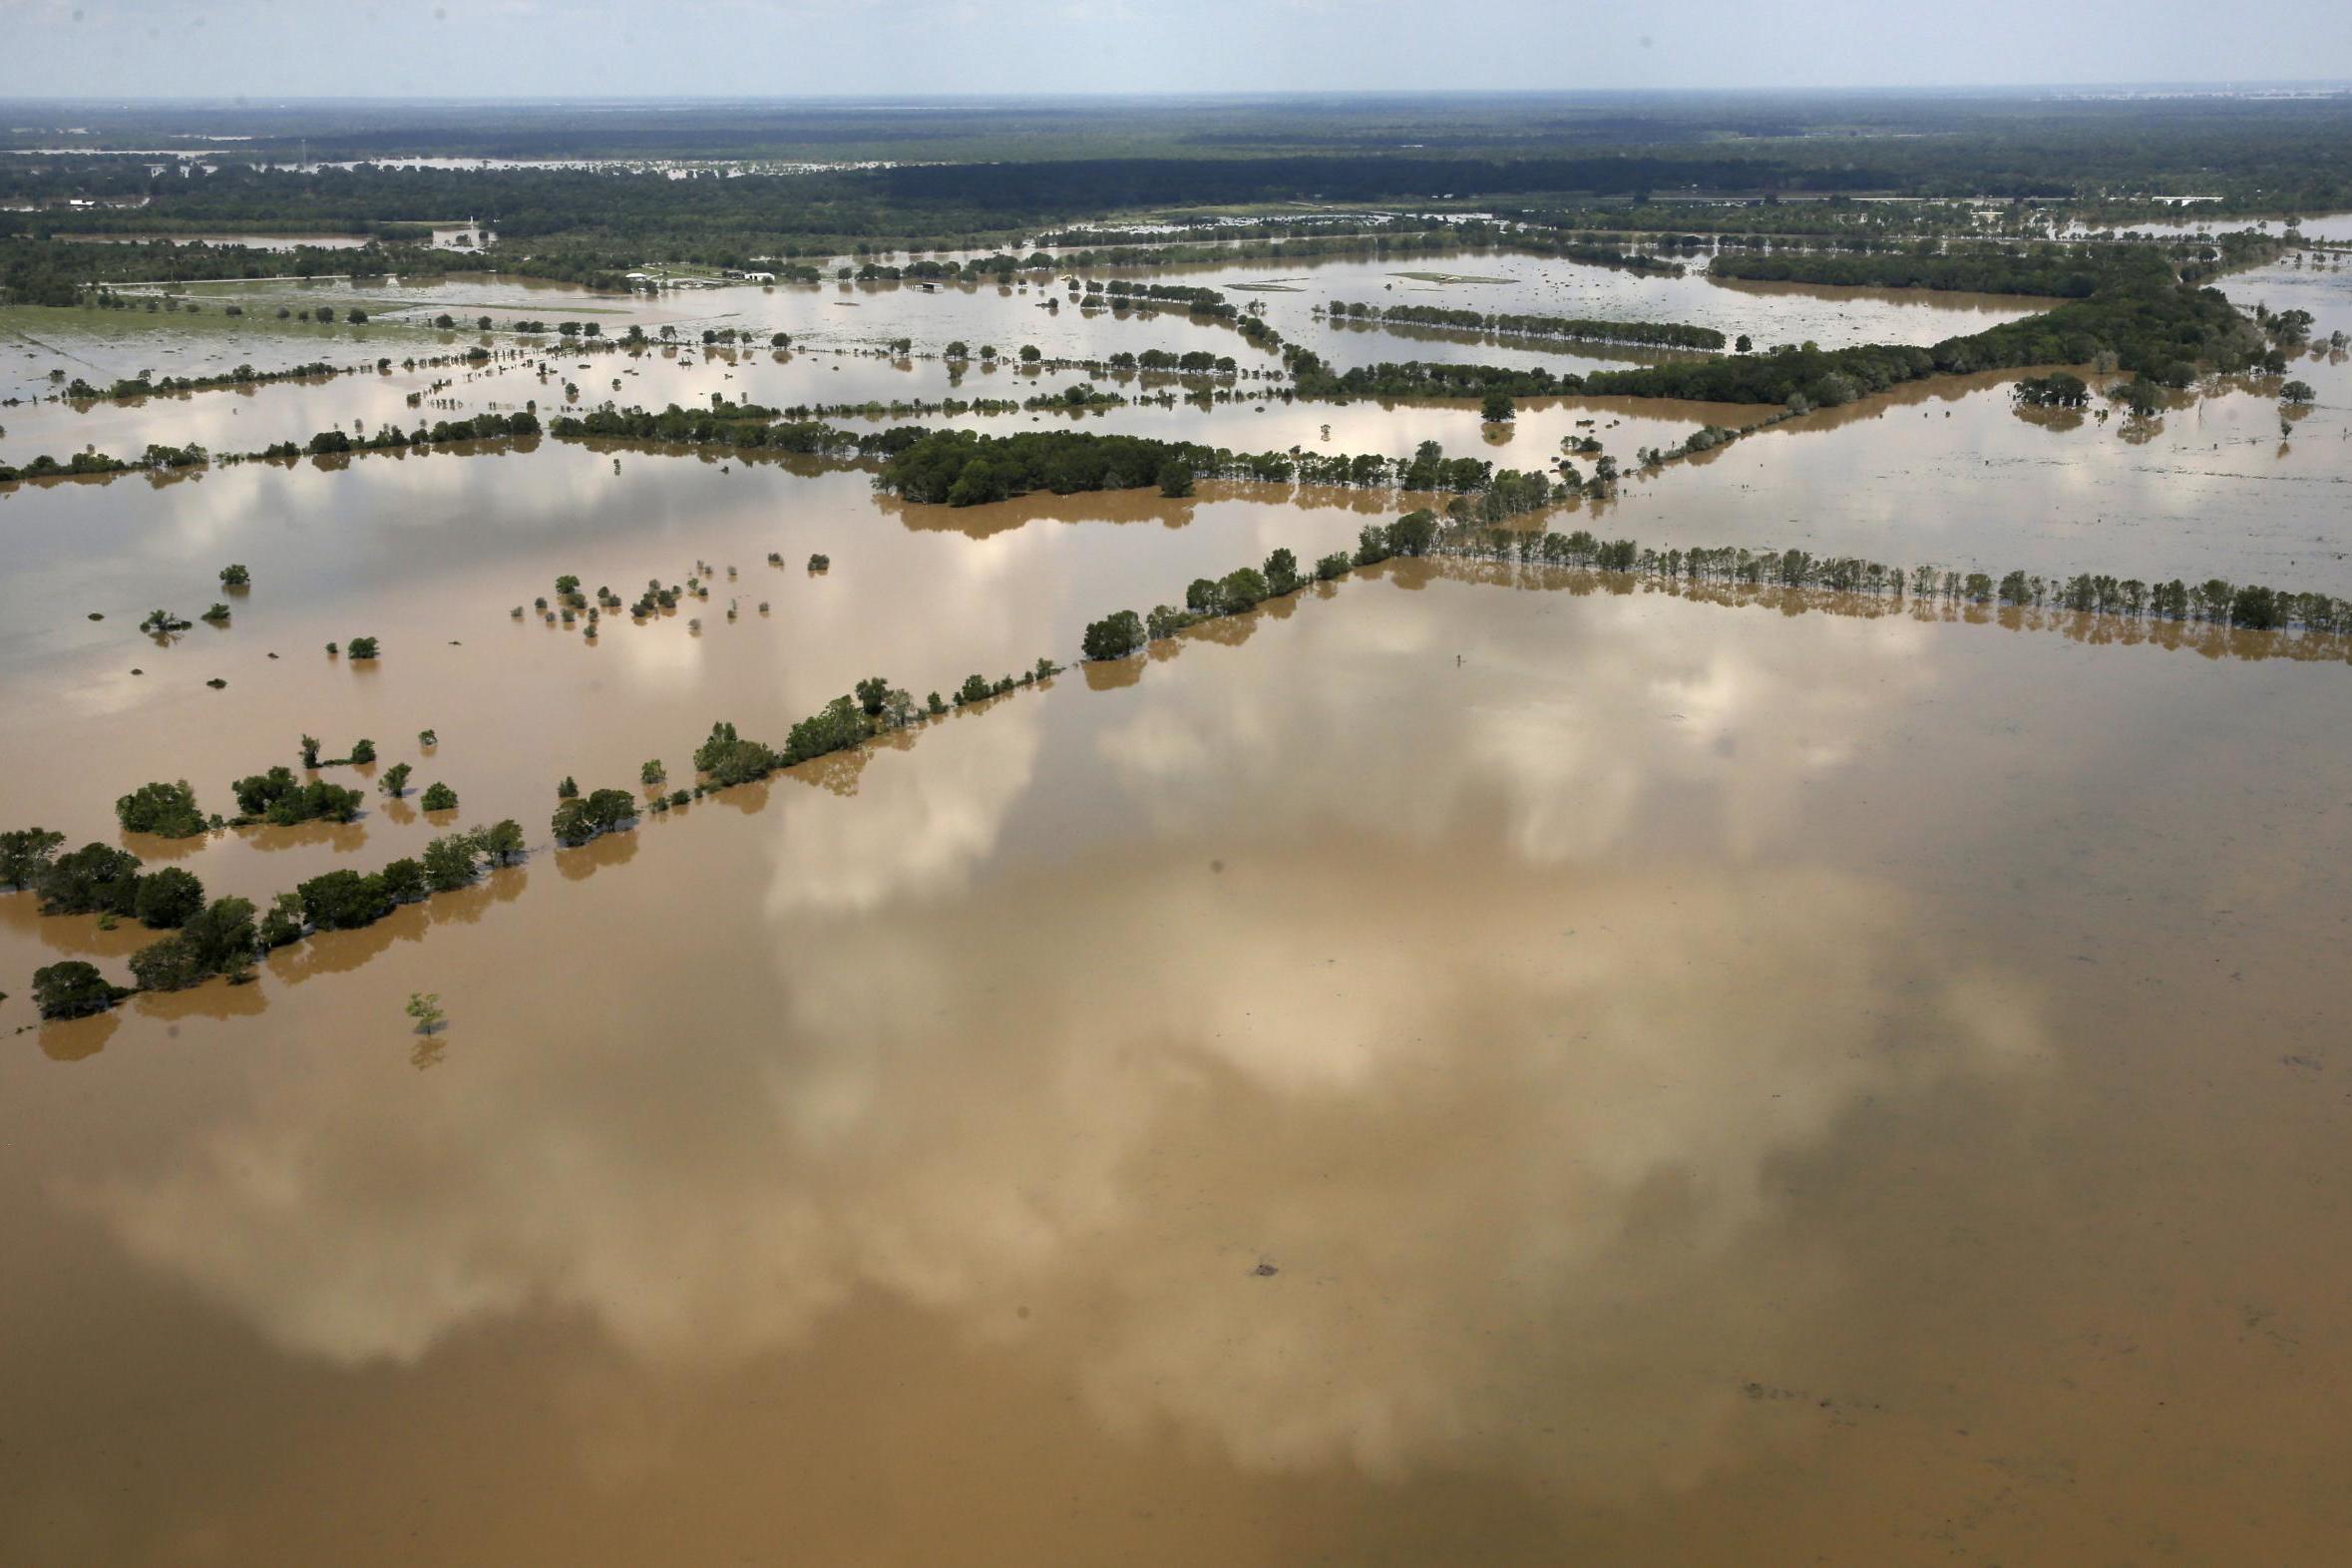 Fields submerged by water from the flooded Brazos River in the aftermath of Hurricane Harvey near Freeport, Texas